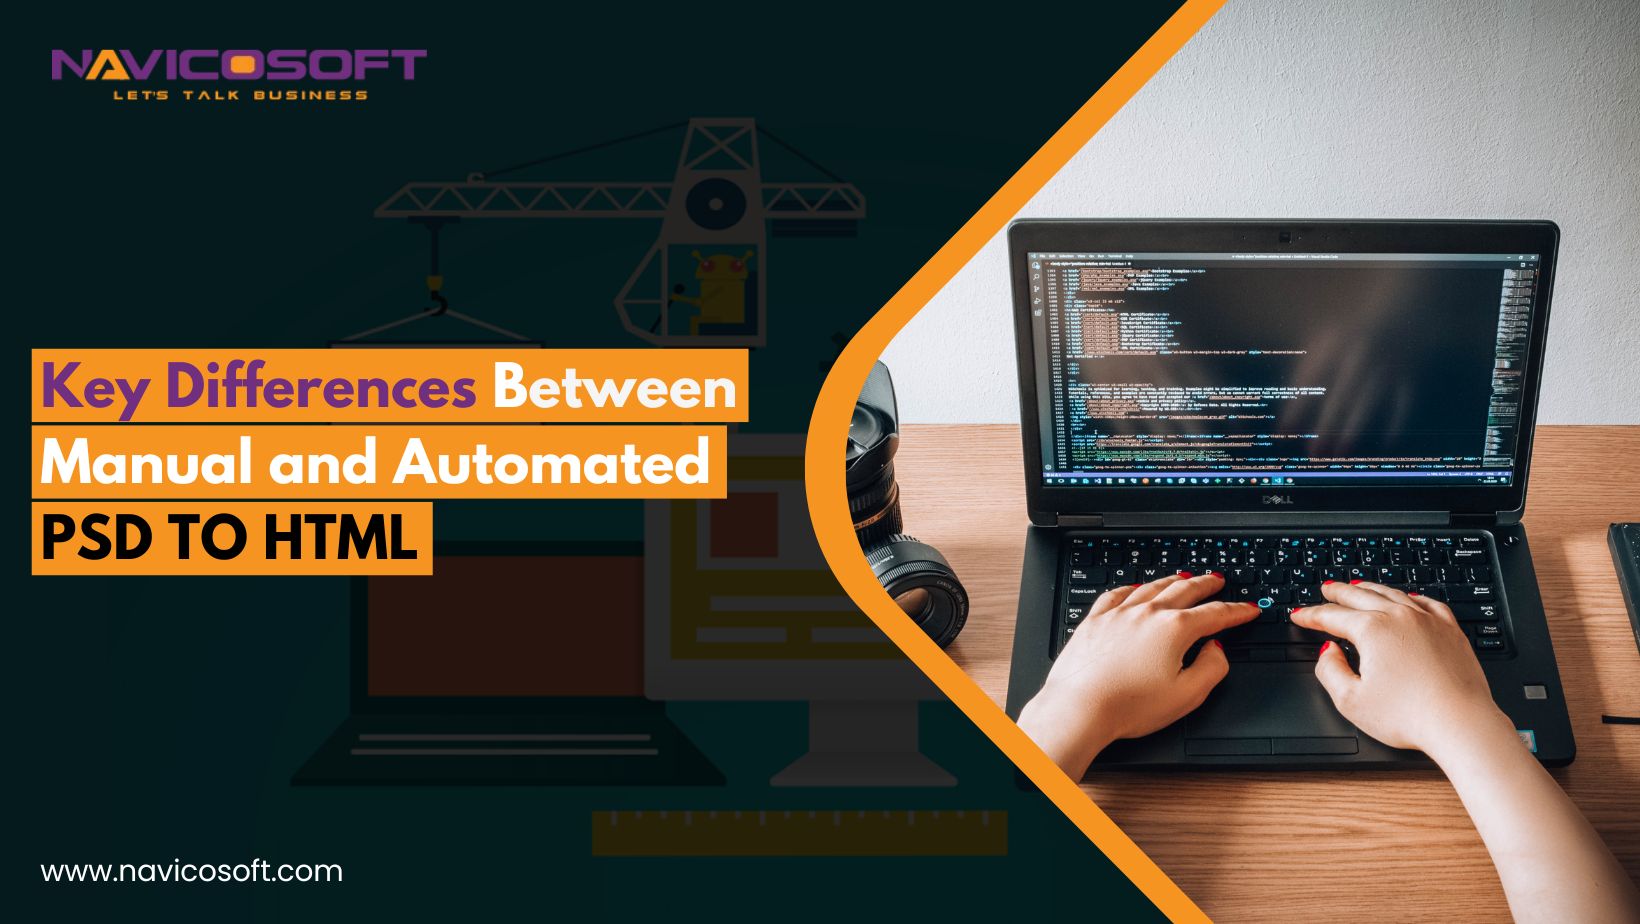 Key Differences between Manual and Automated PSD to HTML